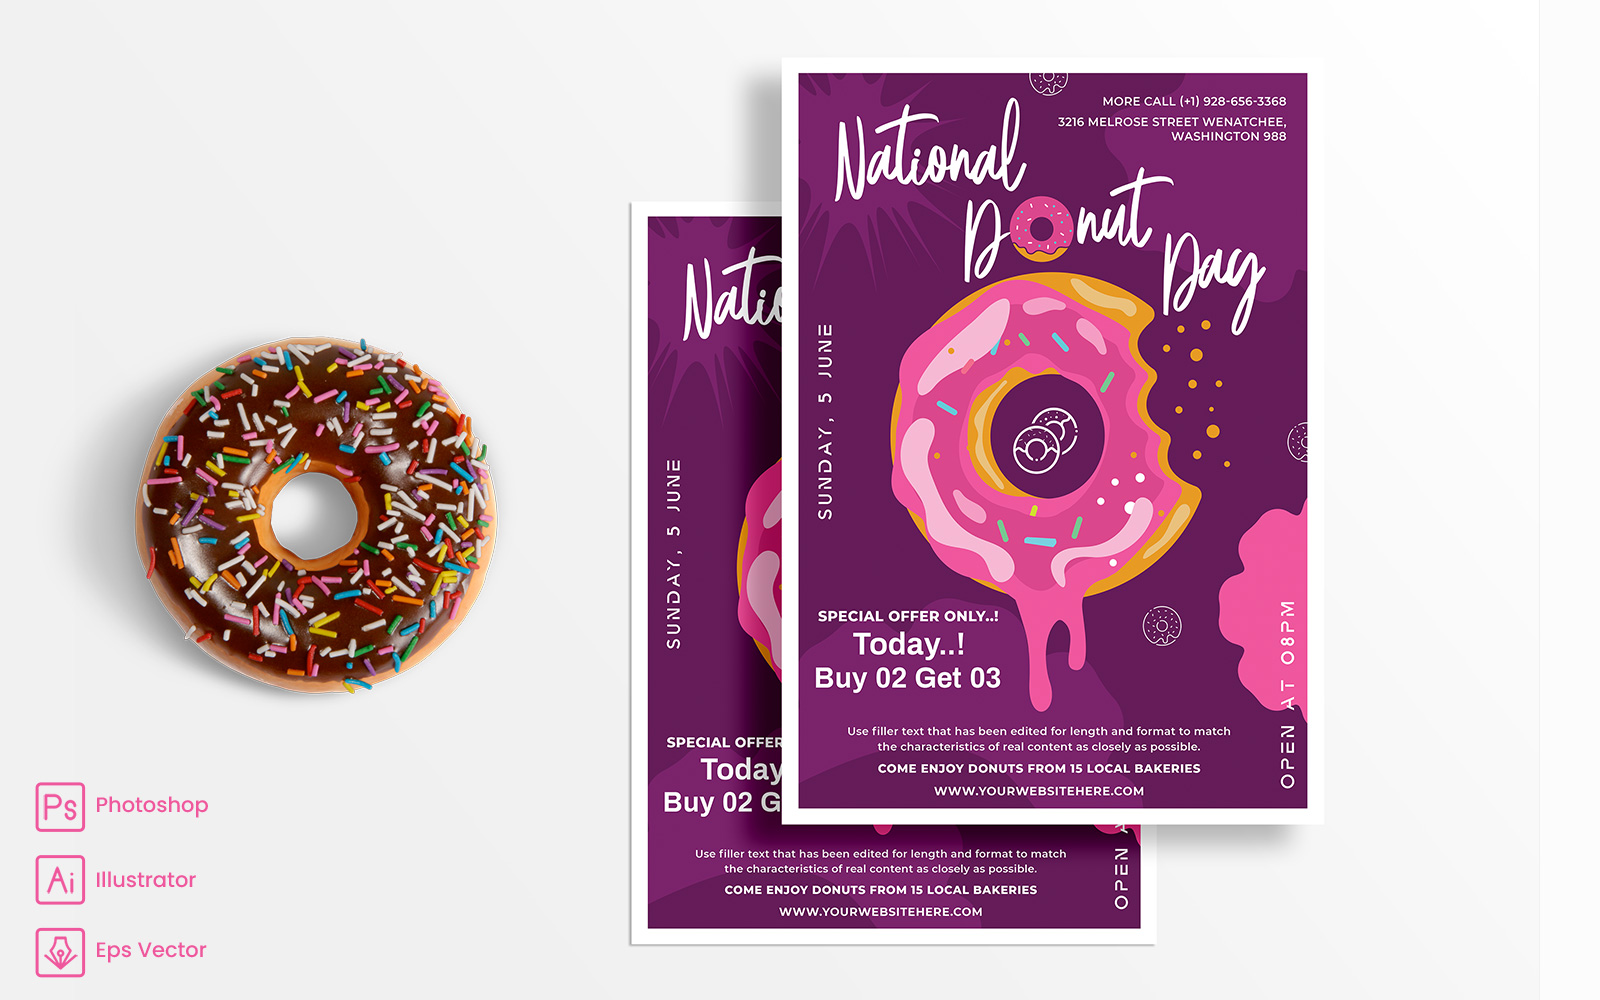 National Donut Day Flyer Print and Social Media Template